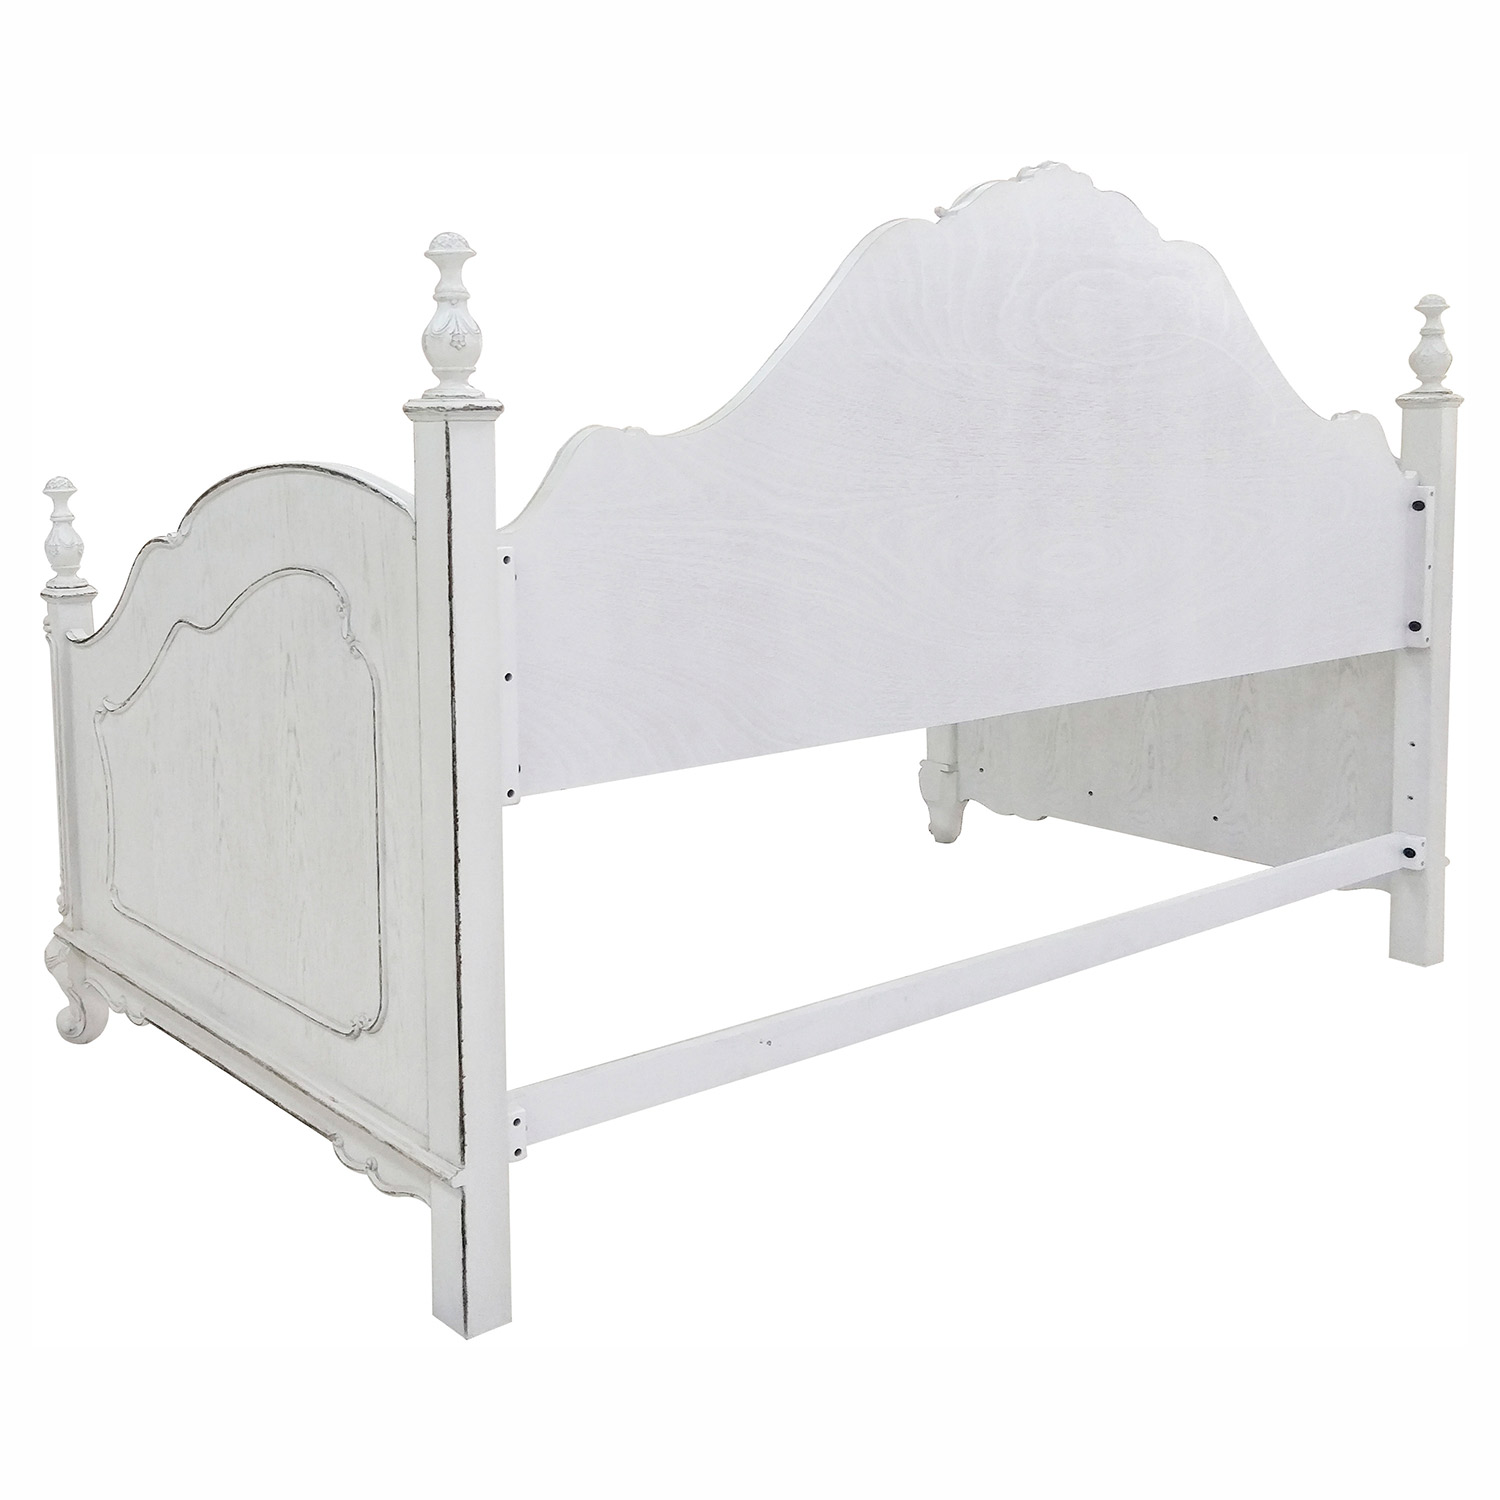 Homelegance Cinderella Daybed - Antique White with Gray Rub-Through